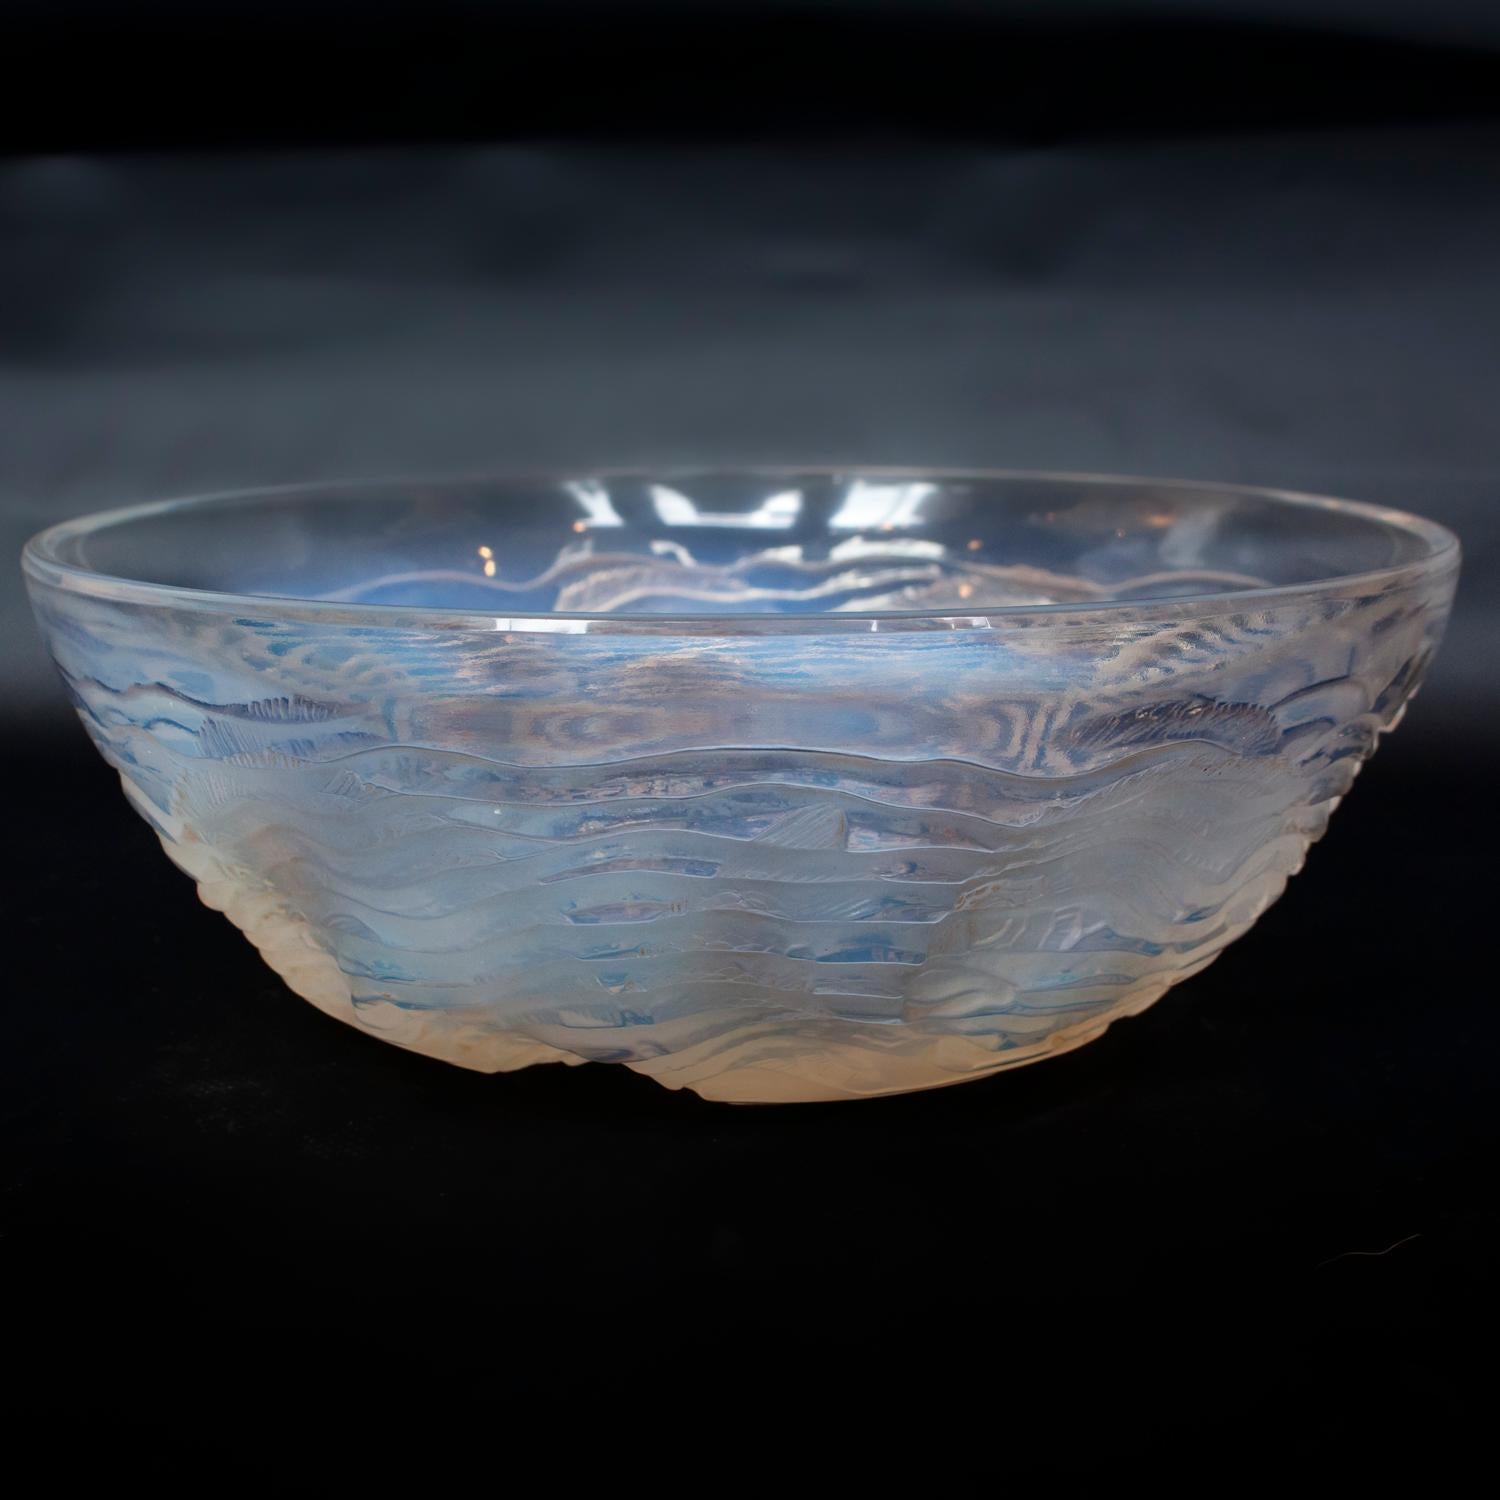 Dauphins, an Art Deco glass bowl. Opalescent and clear glass, decorated over with reverse raised motifs of stylized dolphins swimming through ripples of water. 

Signed R. Lalique to underside.

Literature: Marcilhac Catalogue Raisonné de